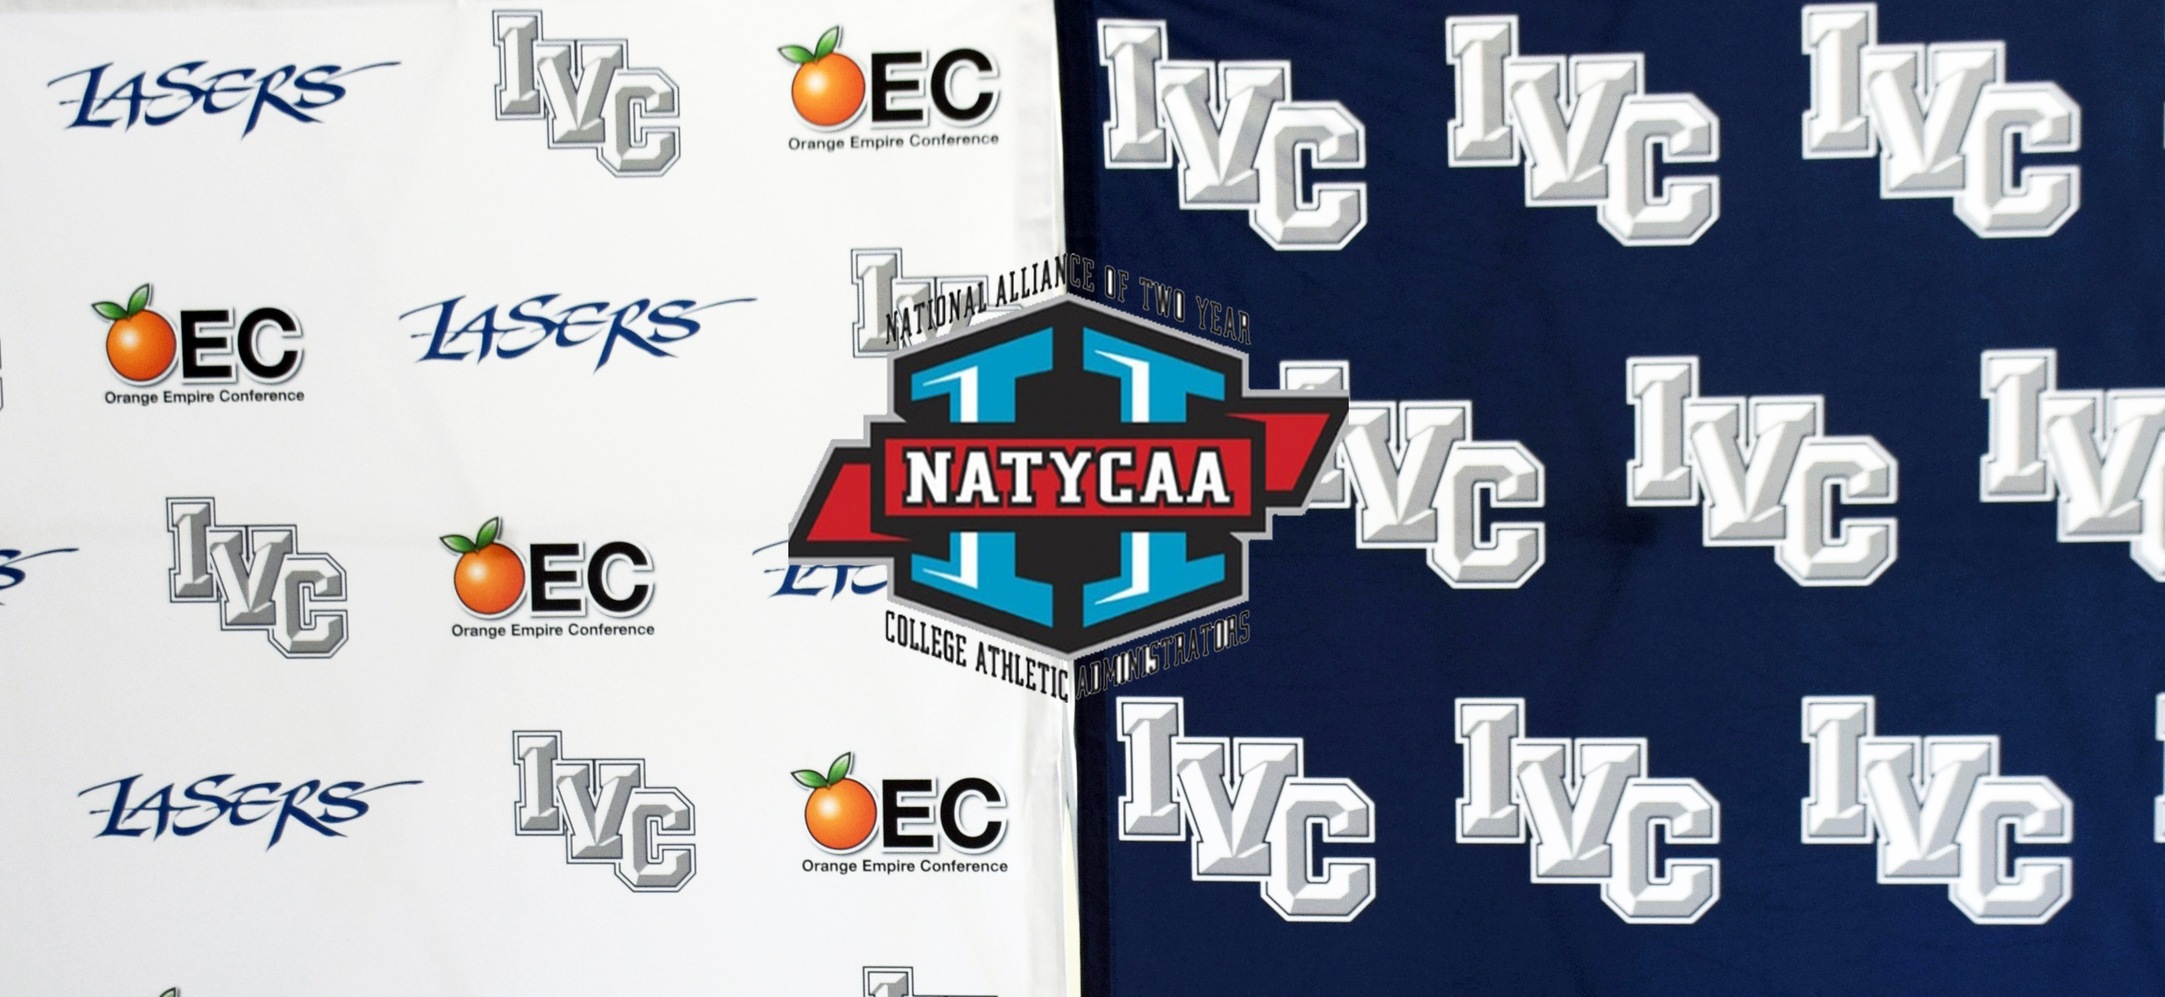 Irvine Valley finishes a strong 12th in NATYCAA Standings